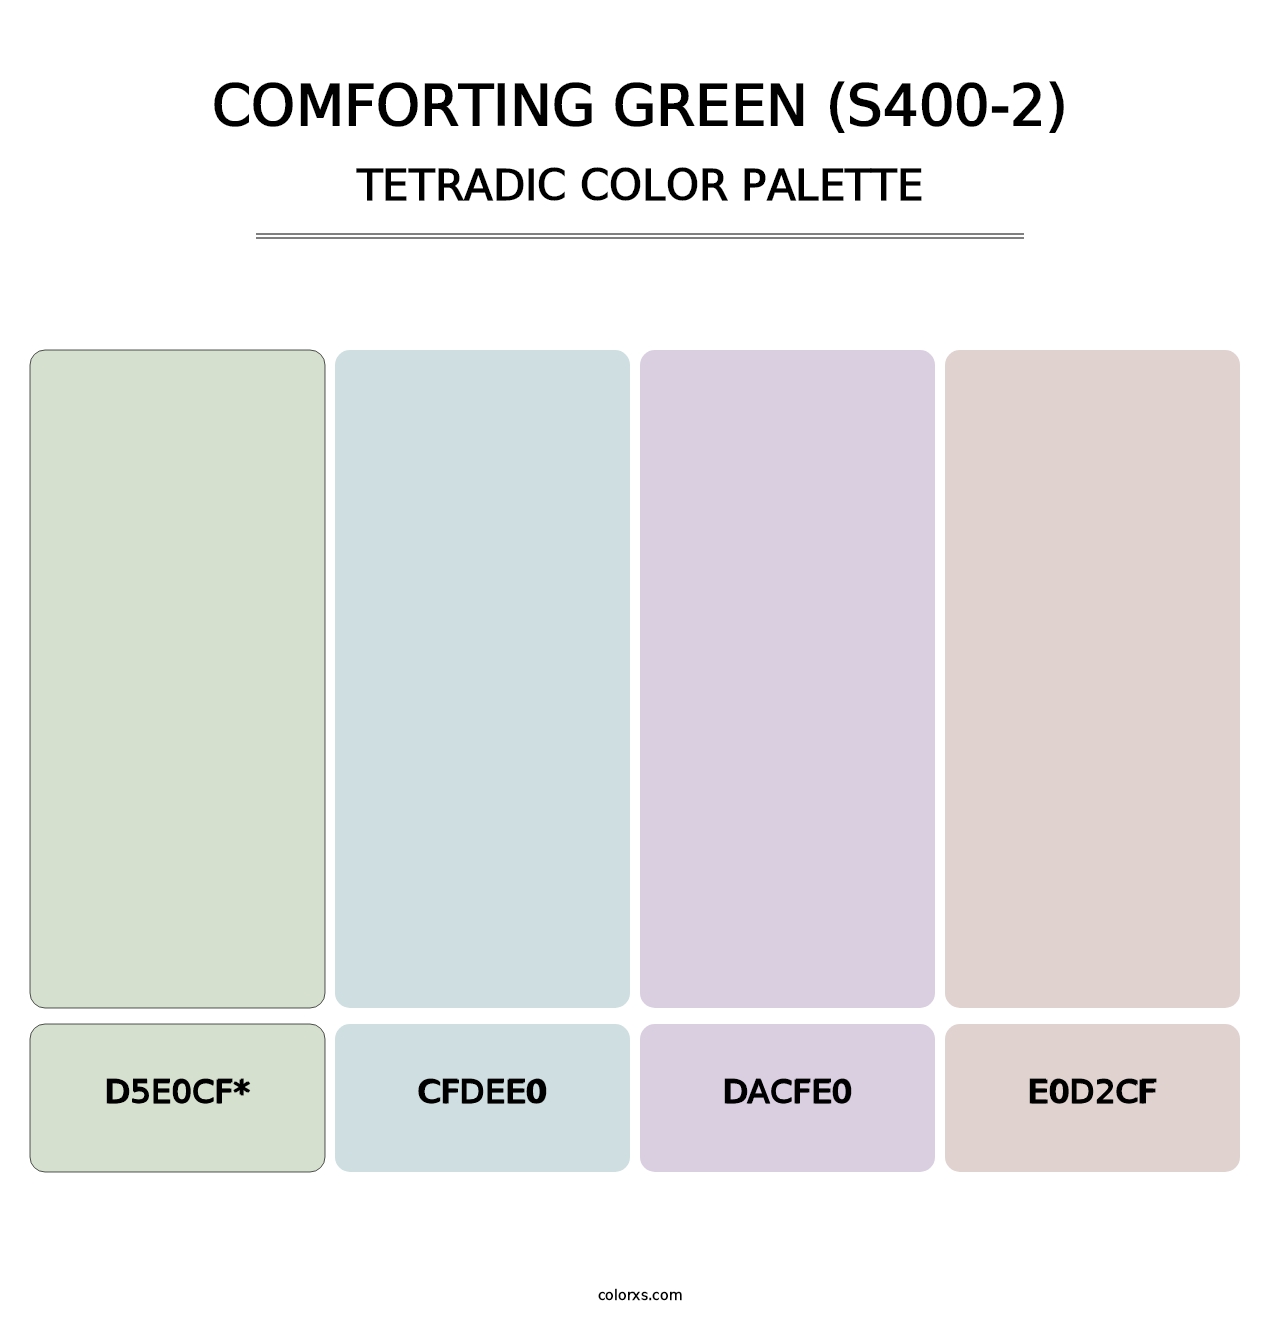 Comforting Green (S400-2) - Tetradic Color Palette